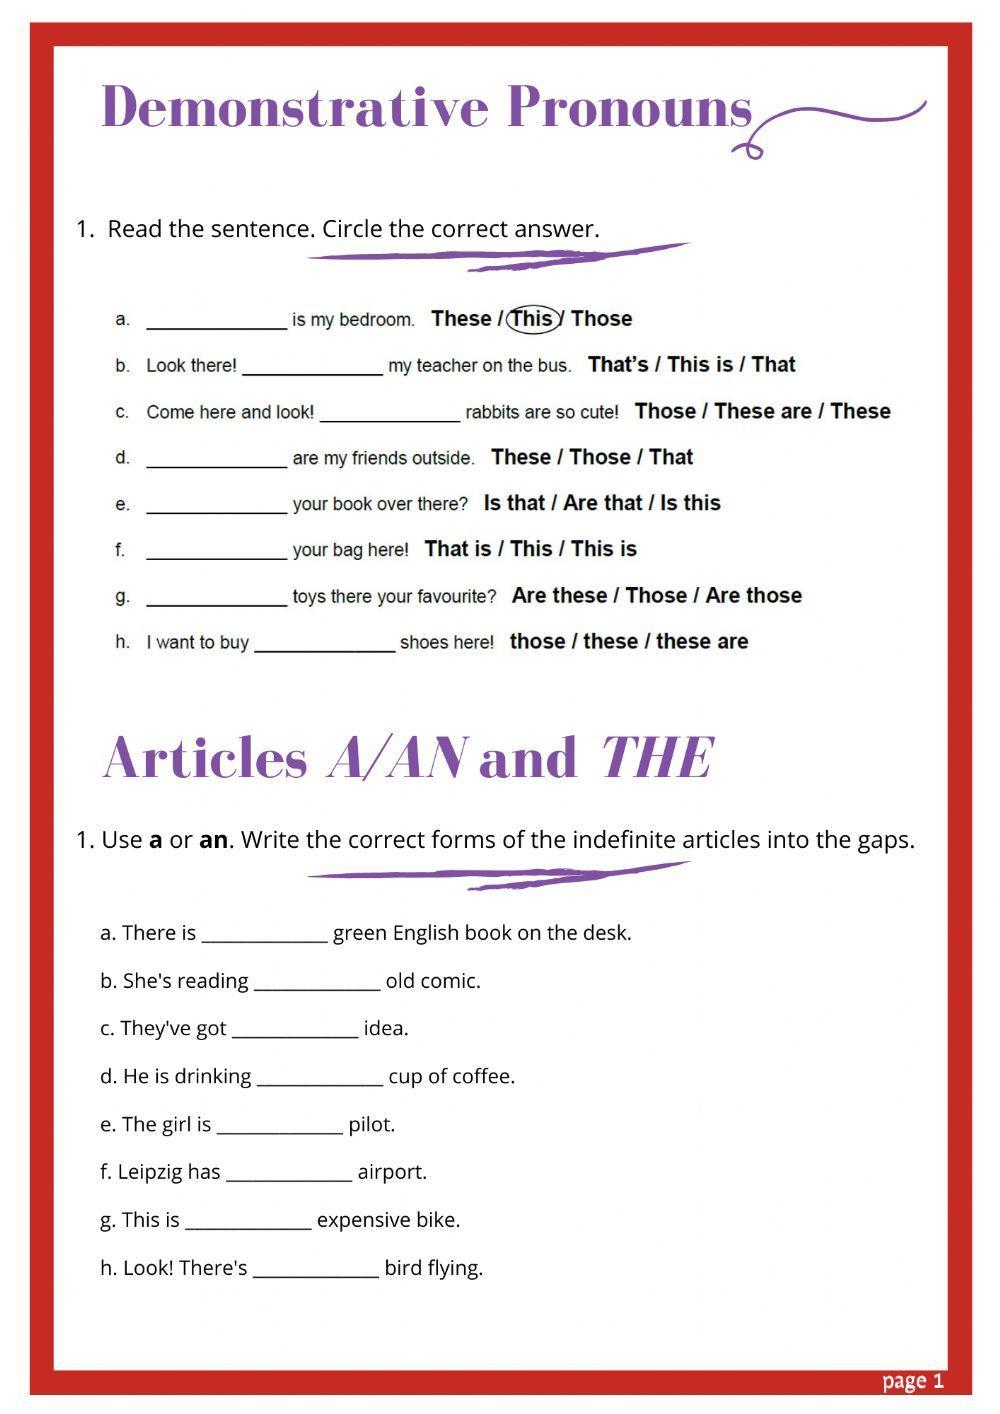 Demonstrative pronouns and articles